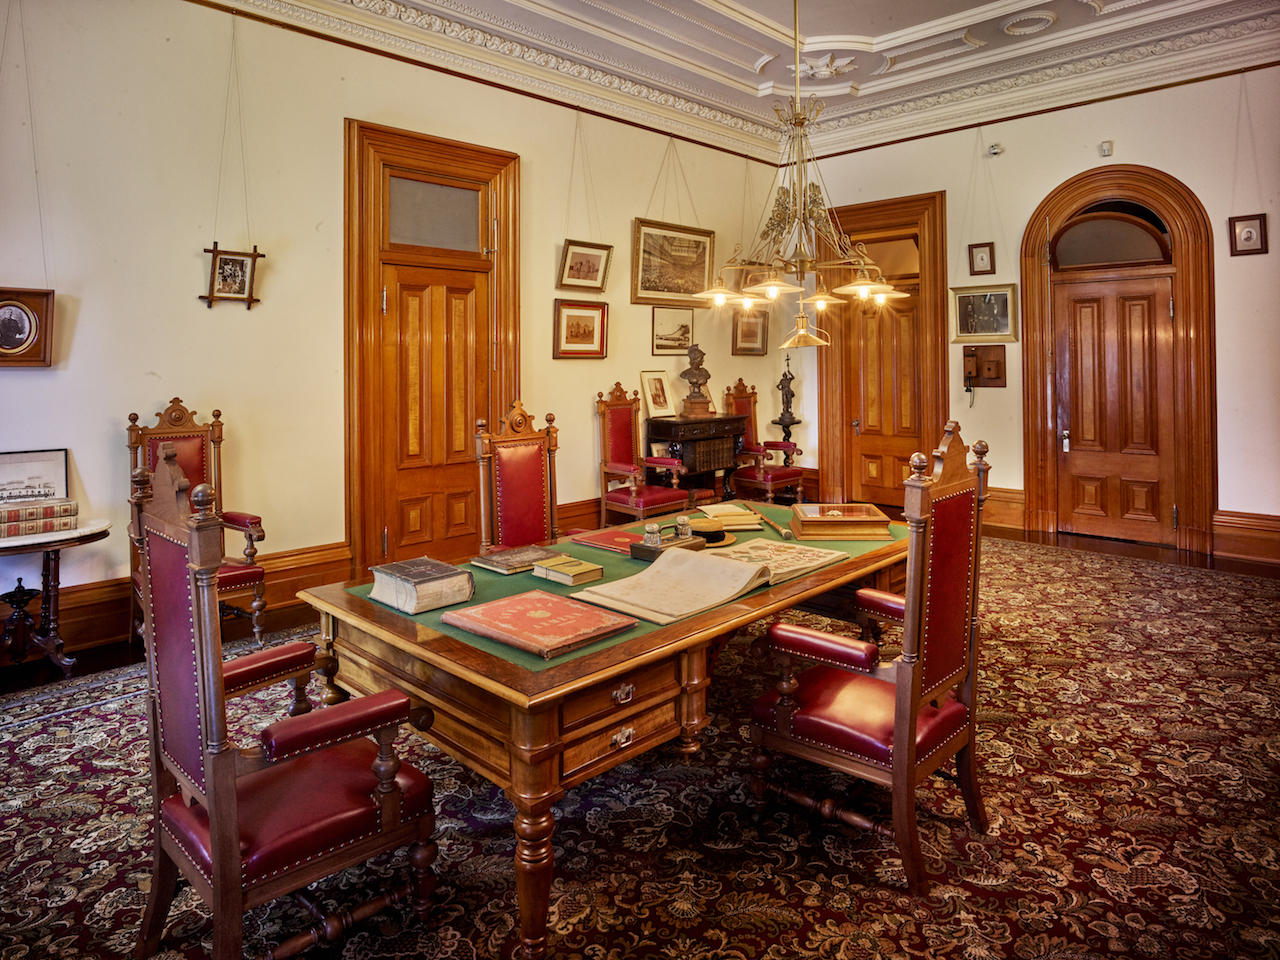 Gallery — The Iolani Palace Book